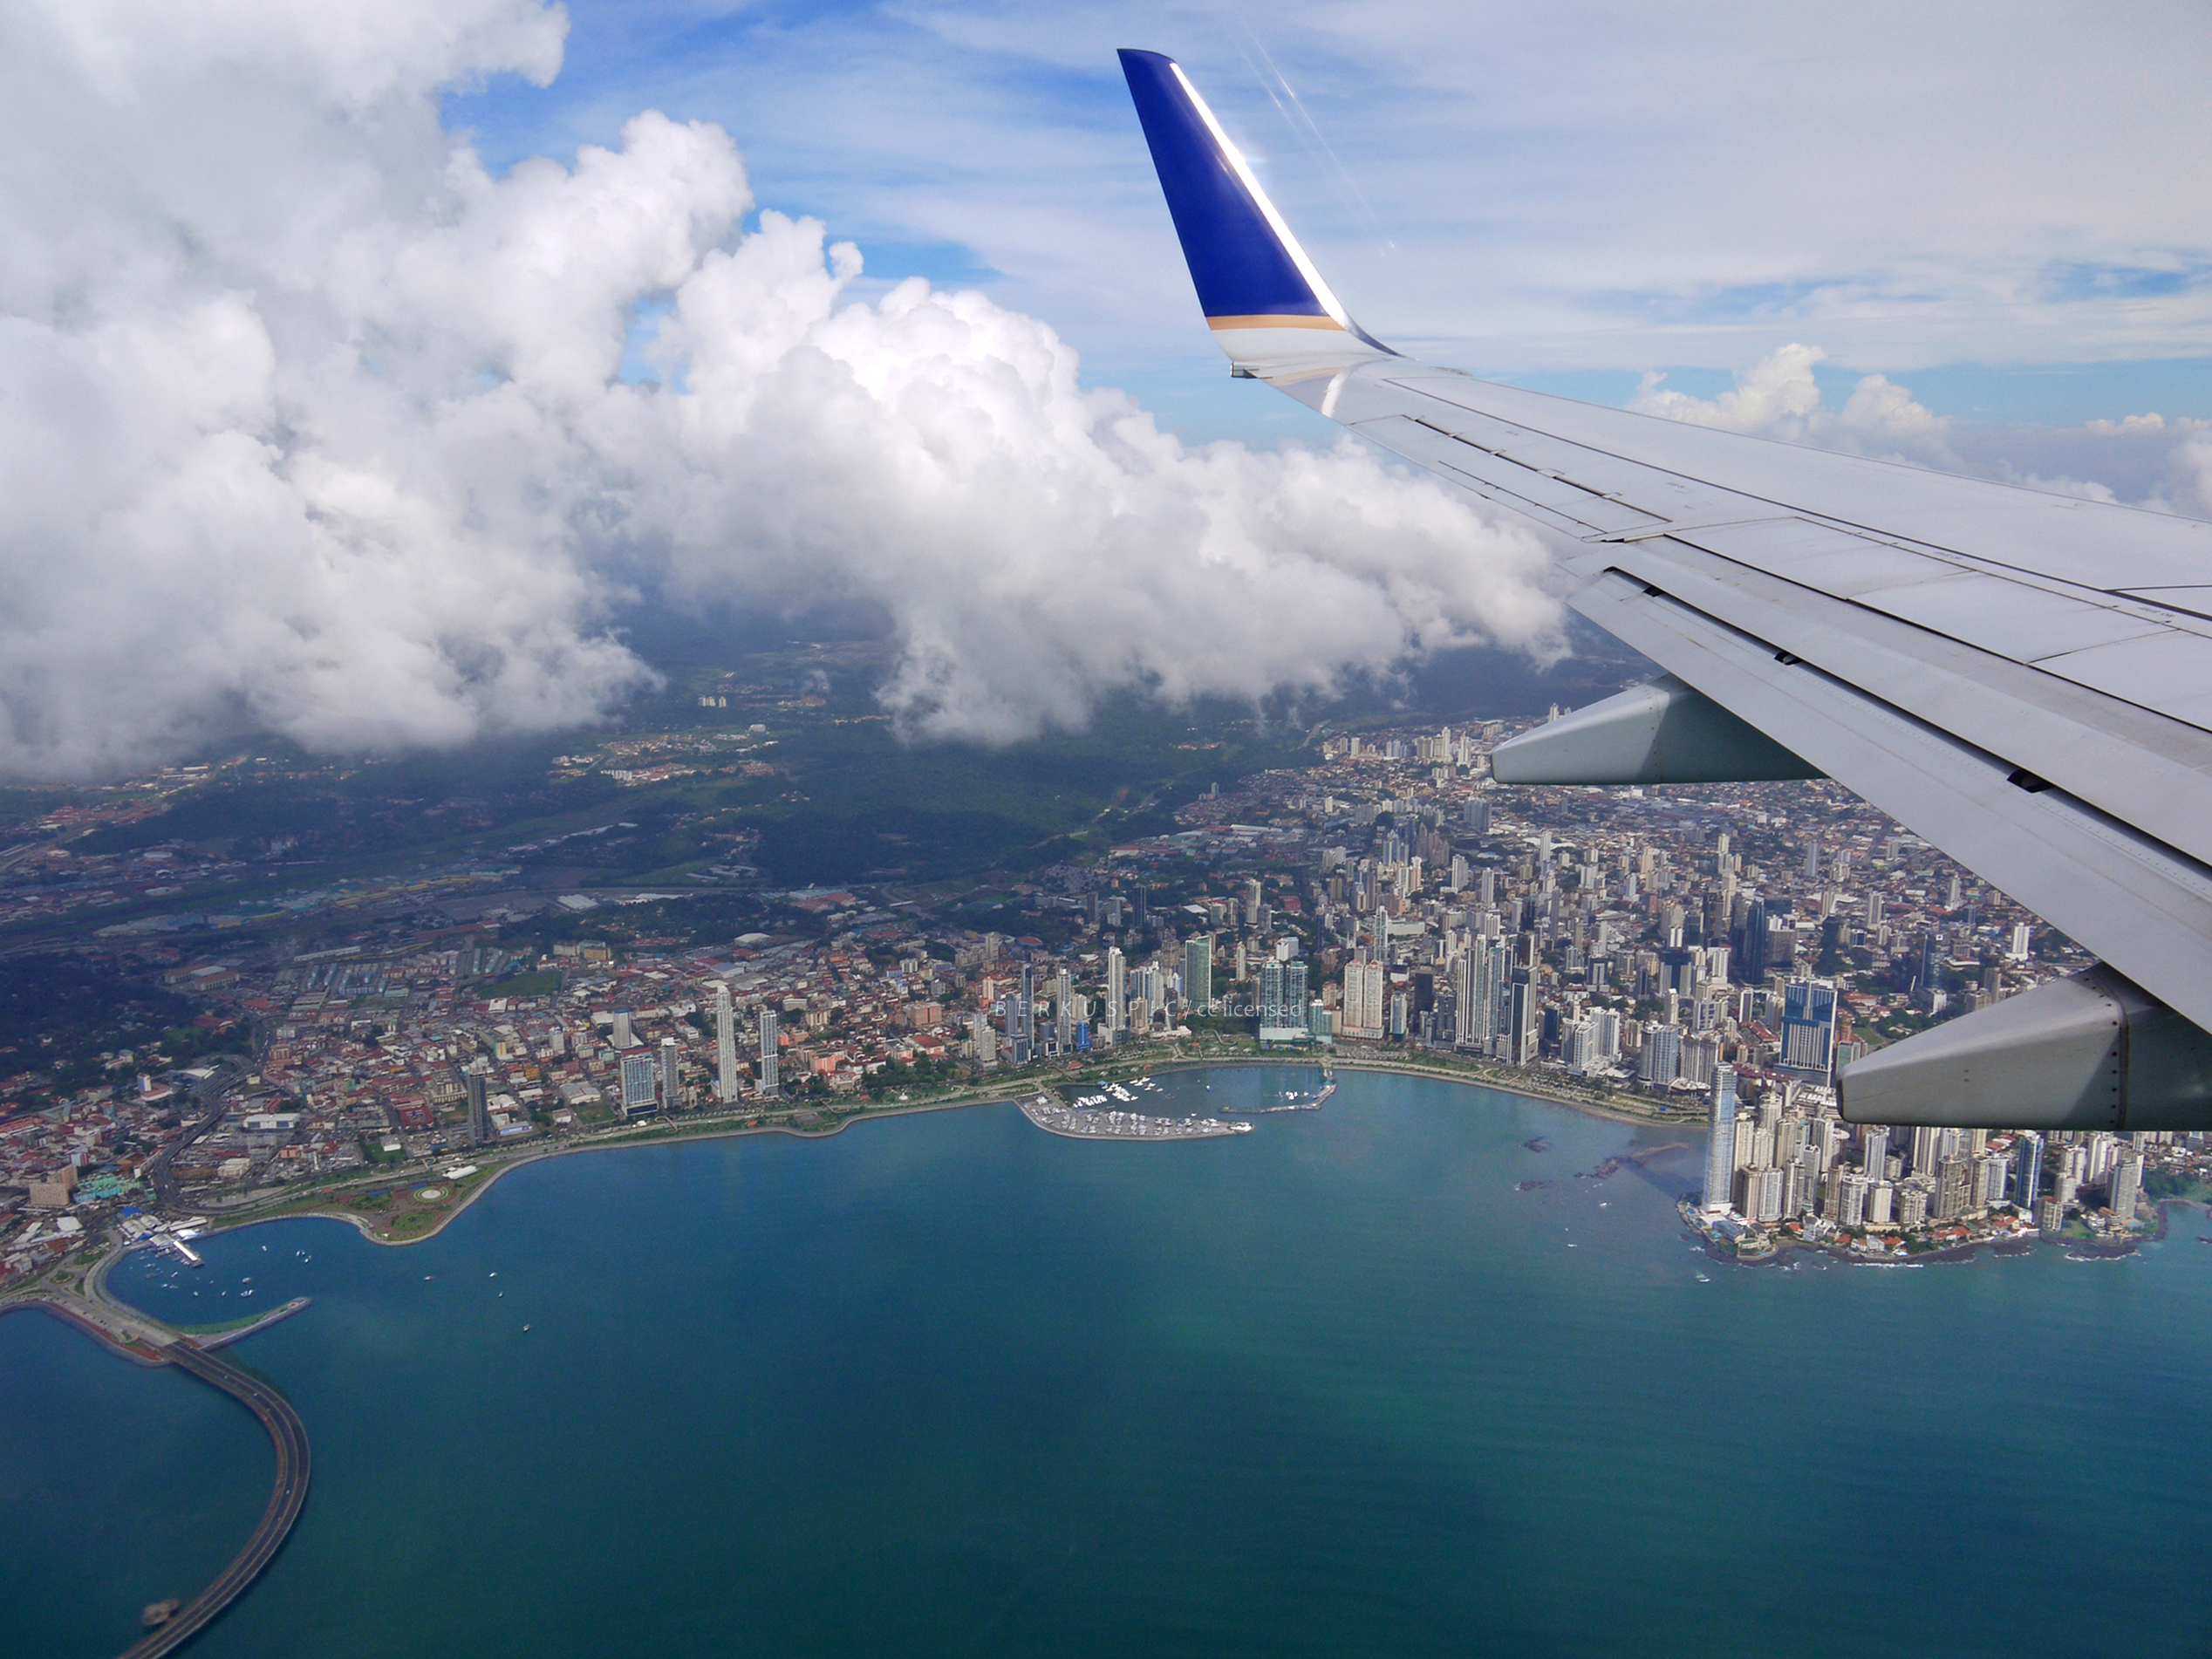 Copa Airlines celebrates inaugural flight from Baltimore to Panama City,  Panama on June 28